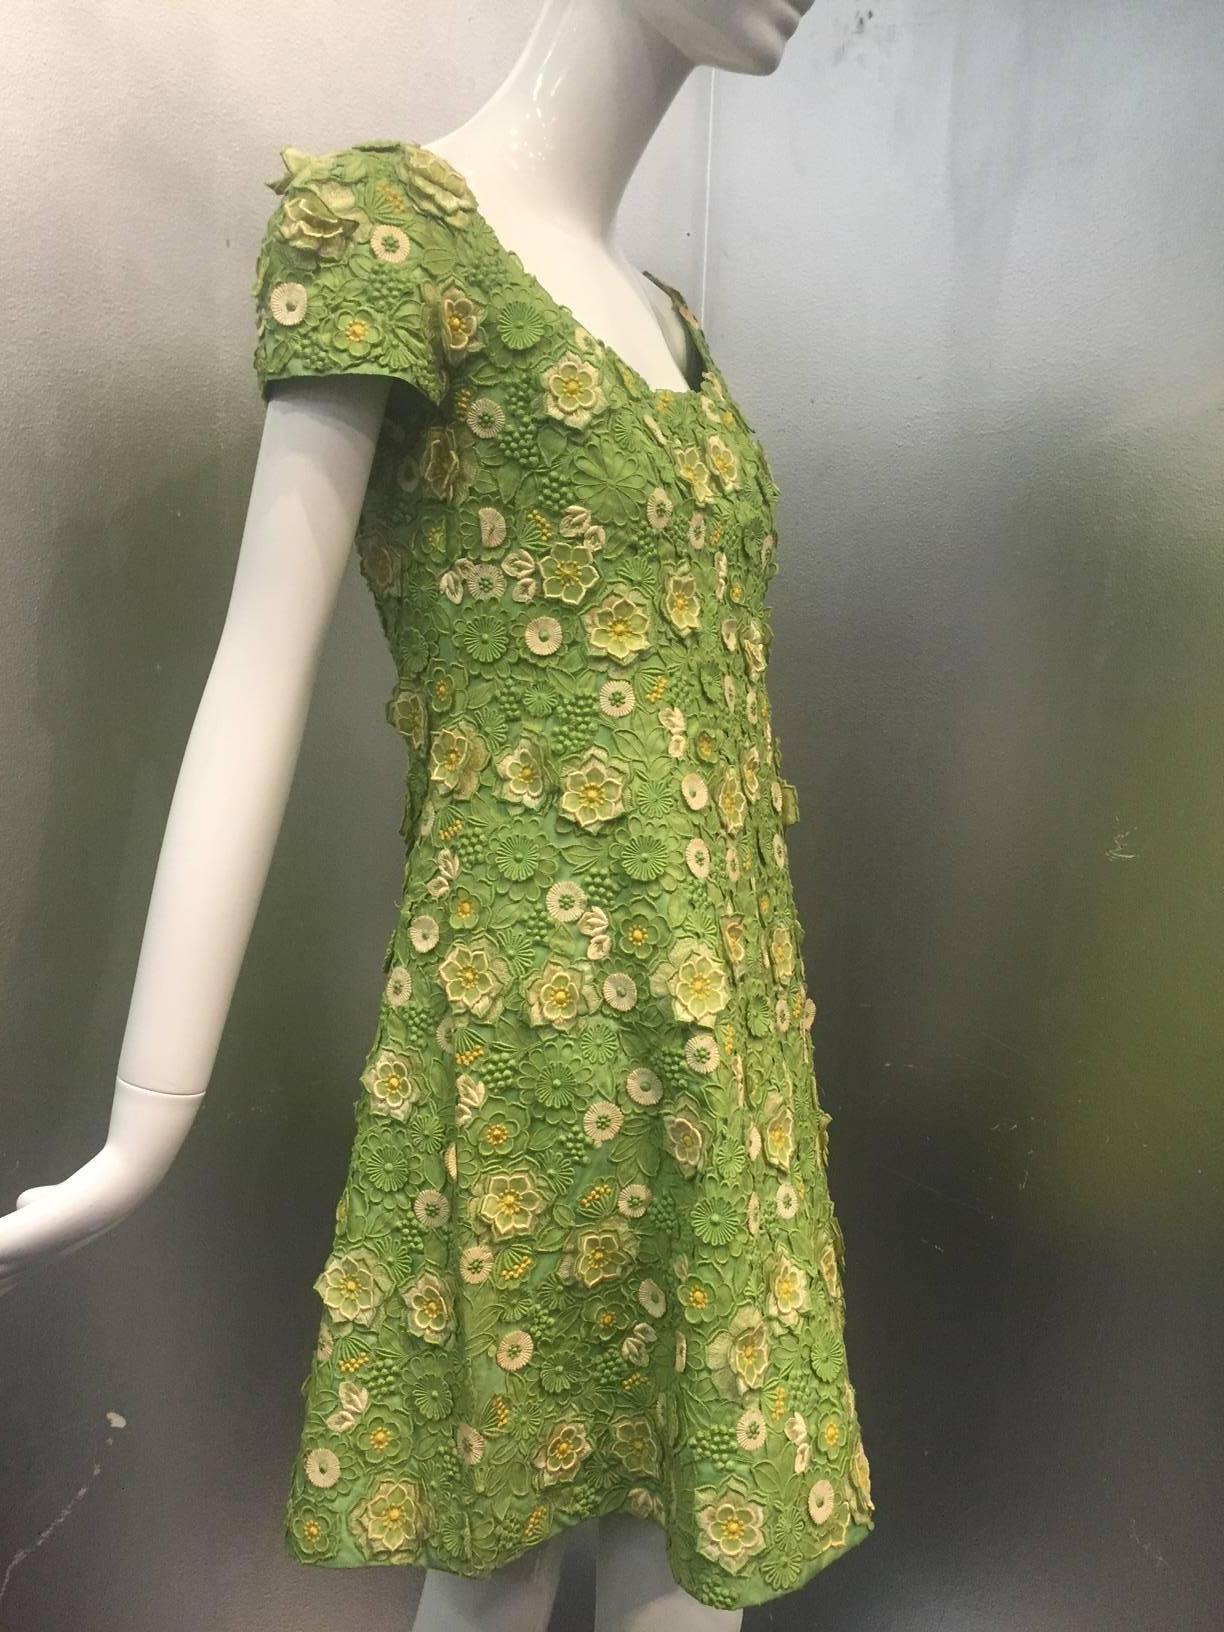 A fantastic 1960s Arnold Scaasi apple green silk appliqué lace mini dress and bolero jacket ensemble.  Completely lined in silk. Skirt hem is constructed with horsehair for volume. Back zipper. 